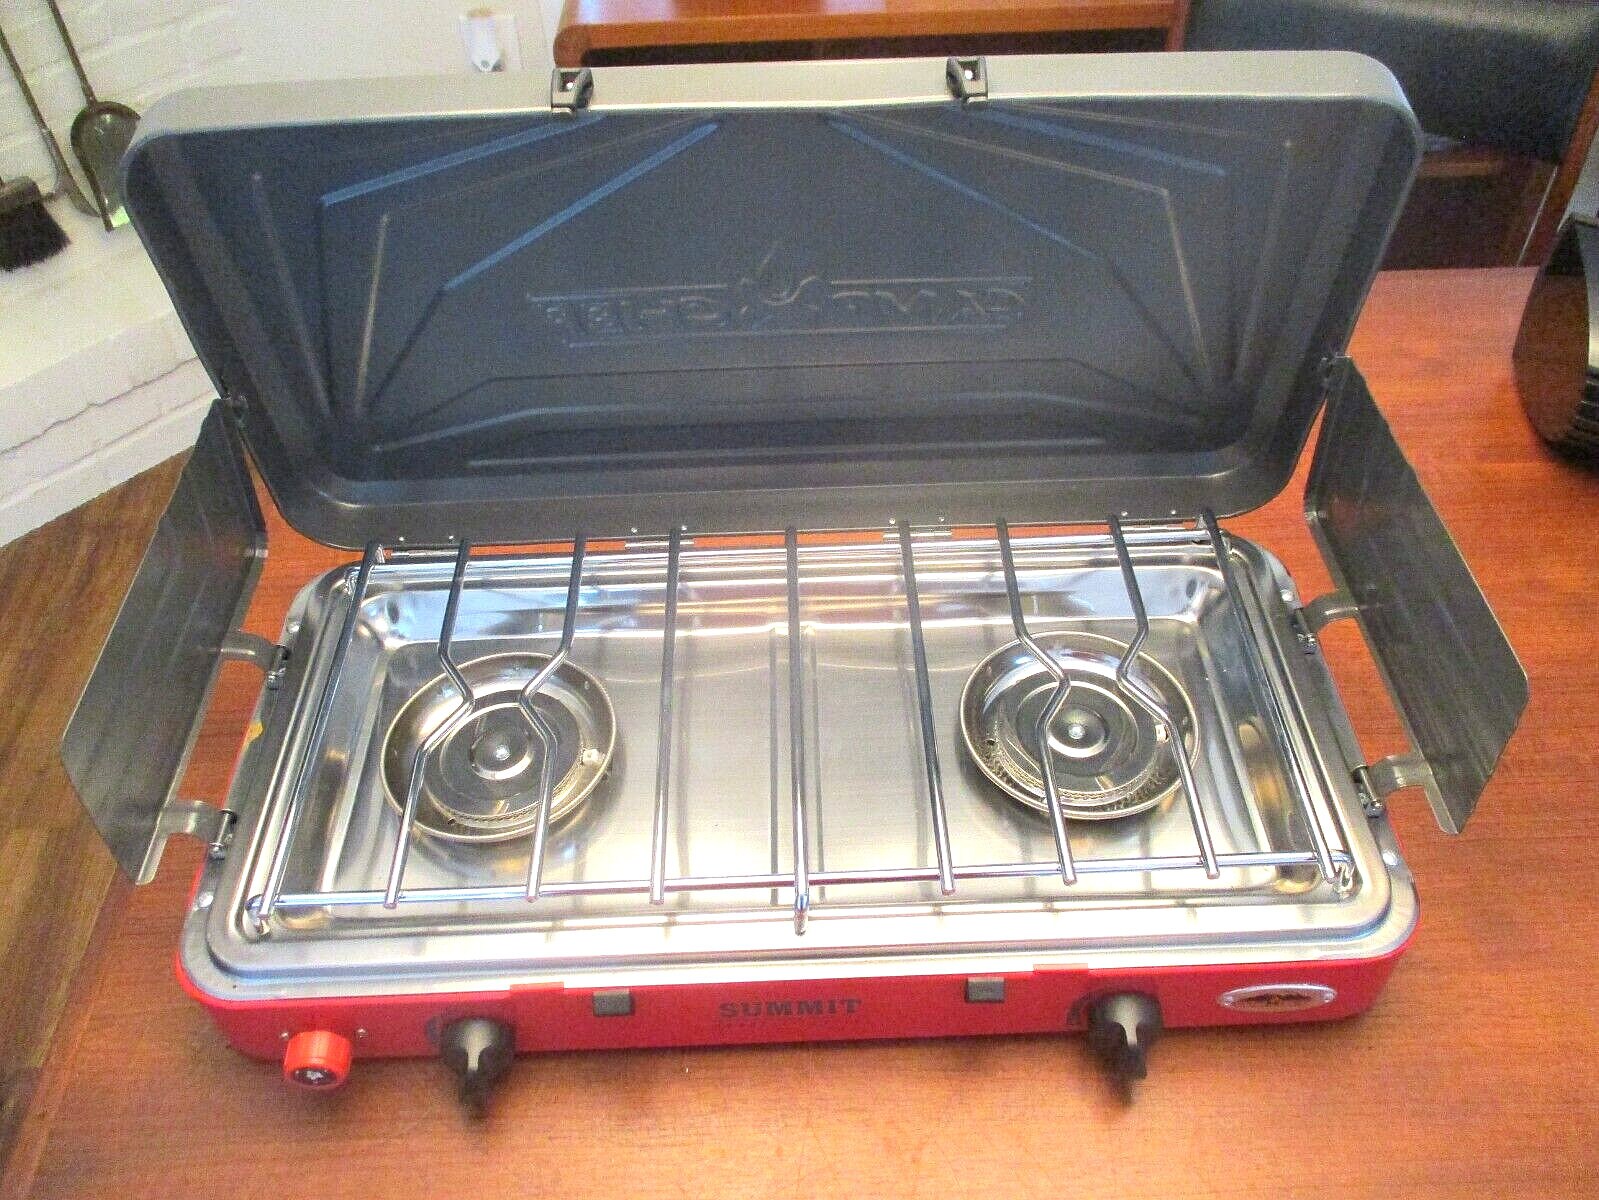 CAMP STOVE HILLARY Sears New Vintage 2 Burner Car Camping Cooking Culinary  Never Used Wilderness Tiny House Diy Hiking Outdoors Grilling 